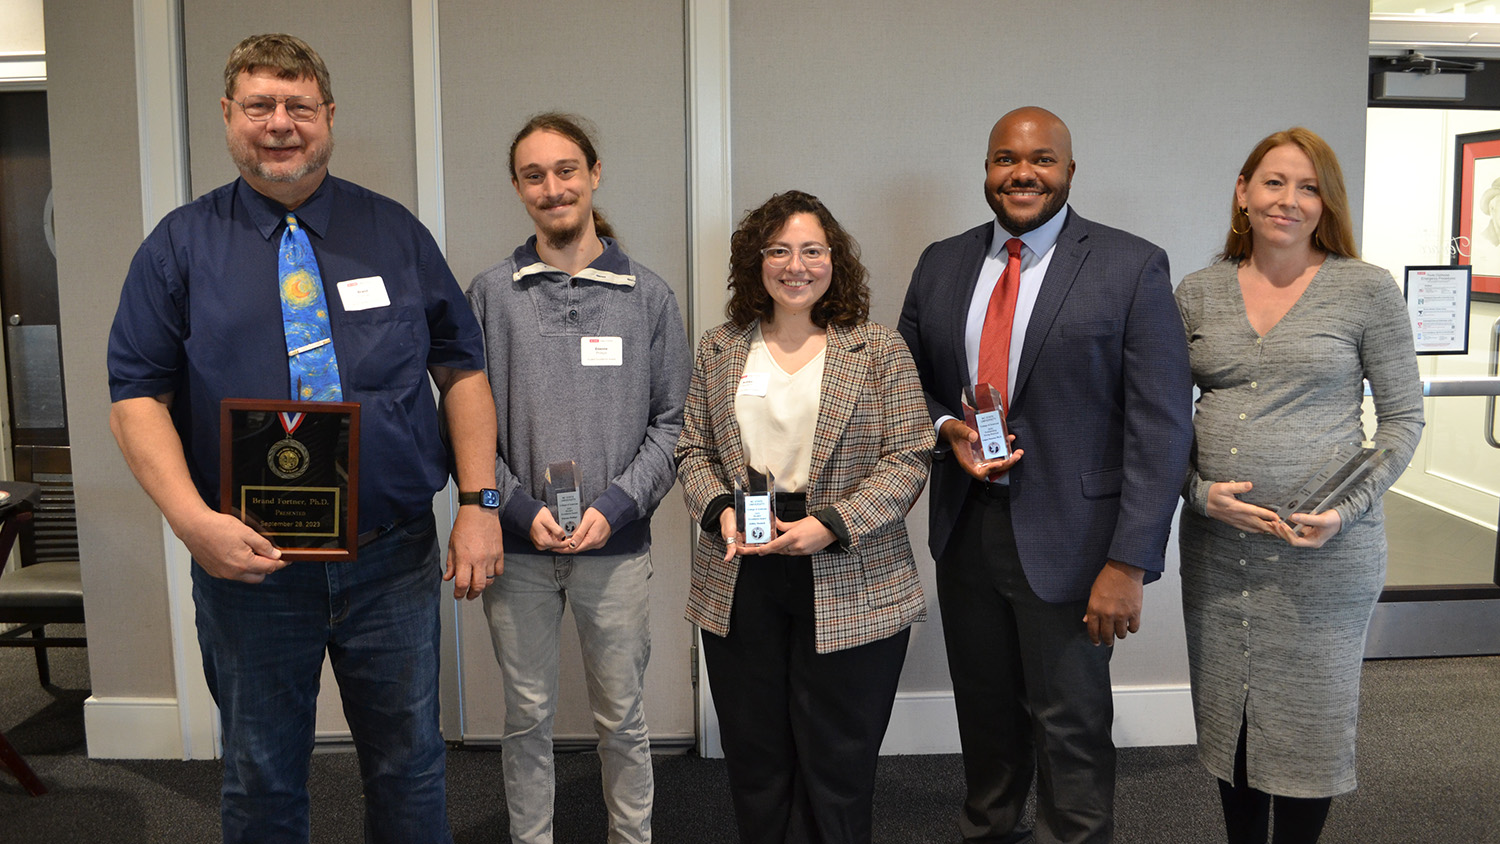 Etienne Phillips stands alongside College of Sciences award recipients